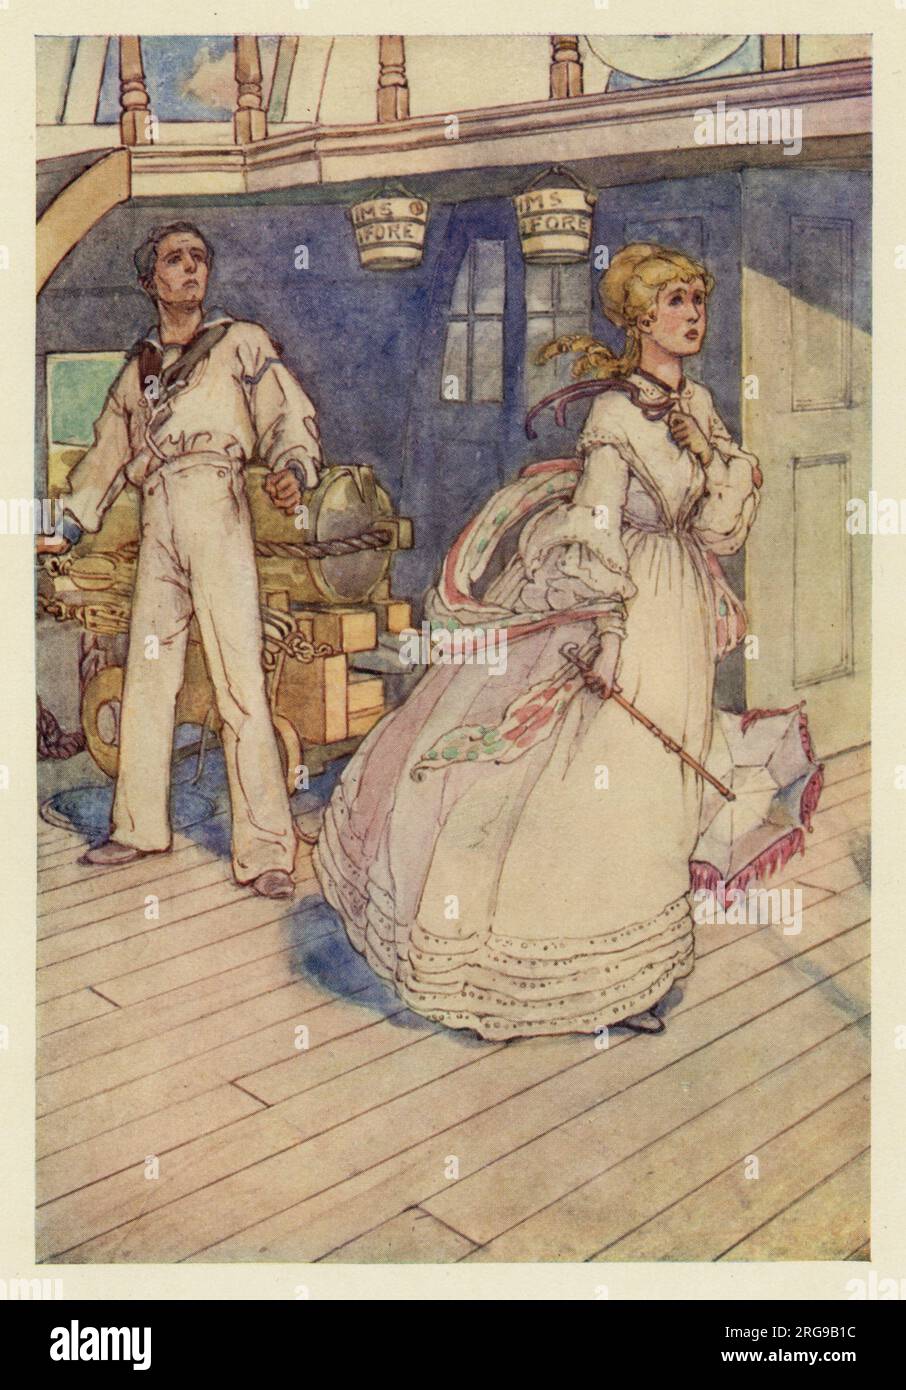 HMS Pinafore. Josephine Corcoran walks away from Ralph Rackstraw. 'So saying, with tell-tale tears streaming down her face, she strode magnificently to her cabin.' Stock Photo